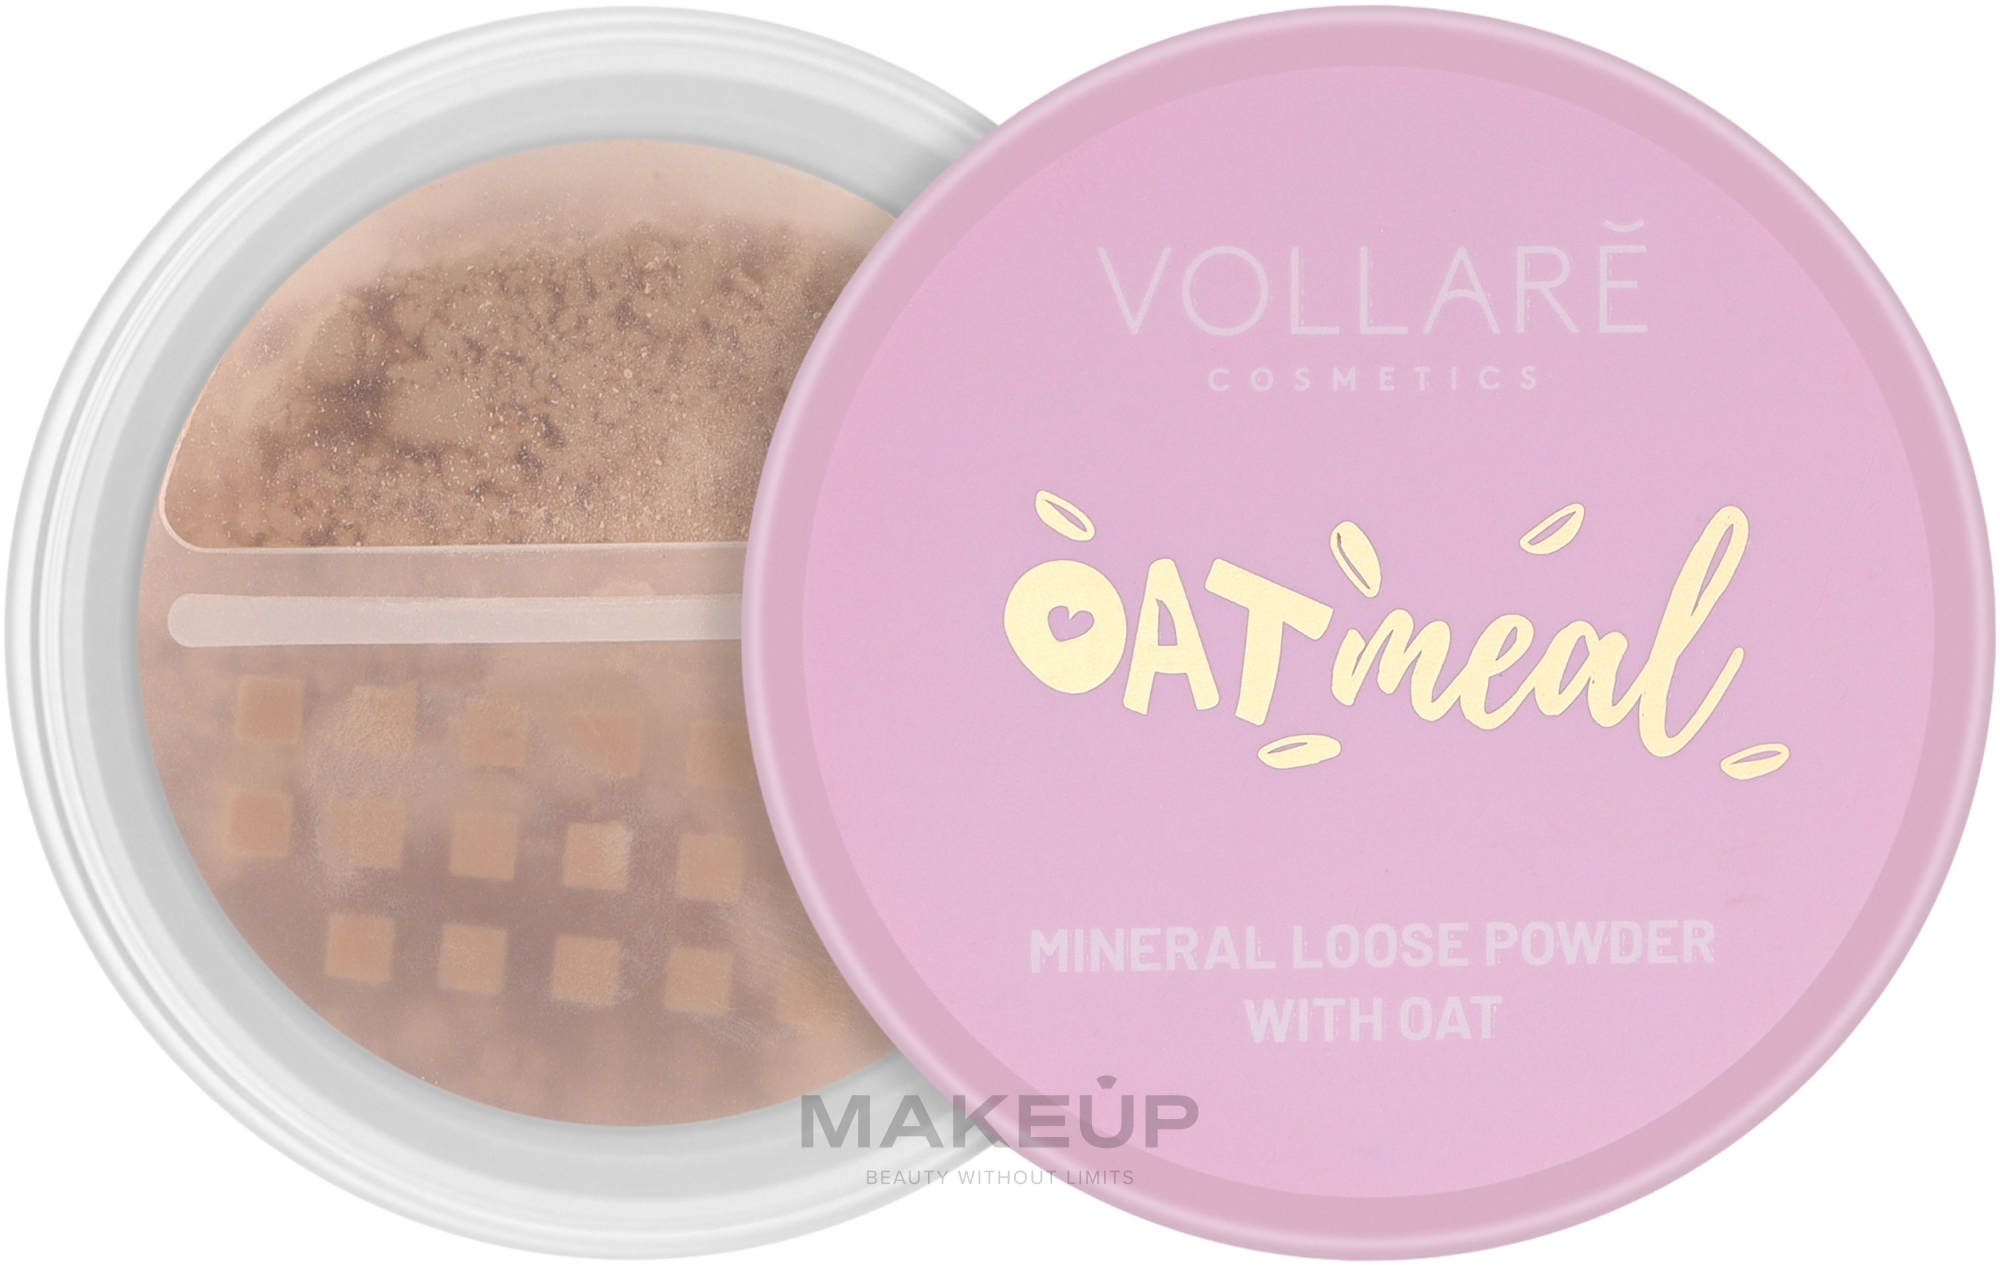 Owsiany puder sypki do twarzy - Vollare Oat Meal Mineral Loose Powder With Oat — Zdjęcie 00